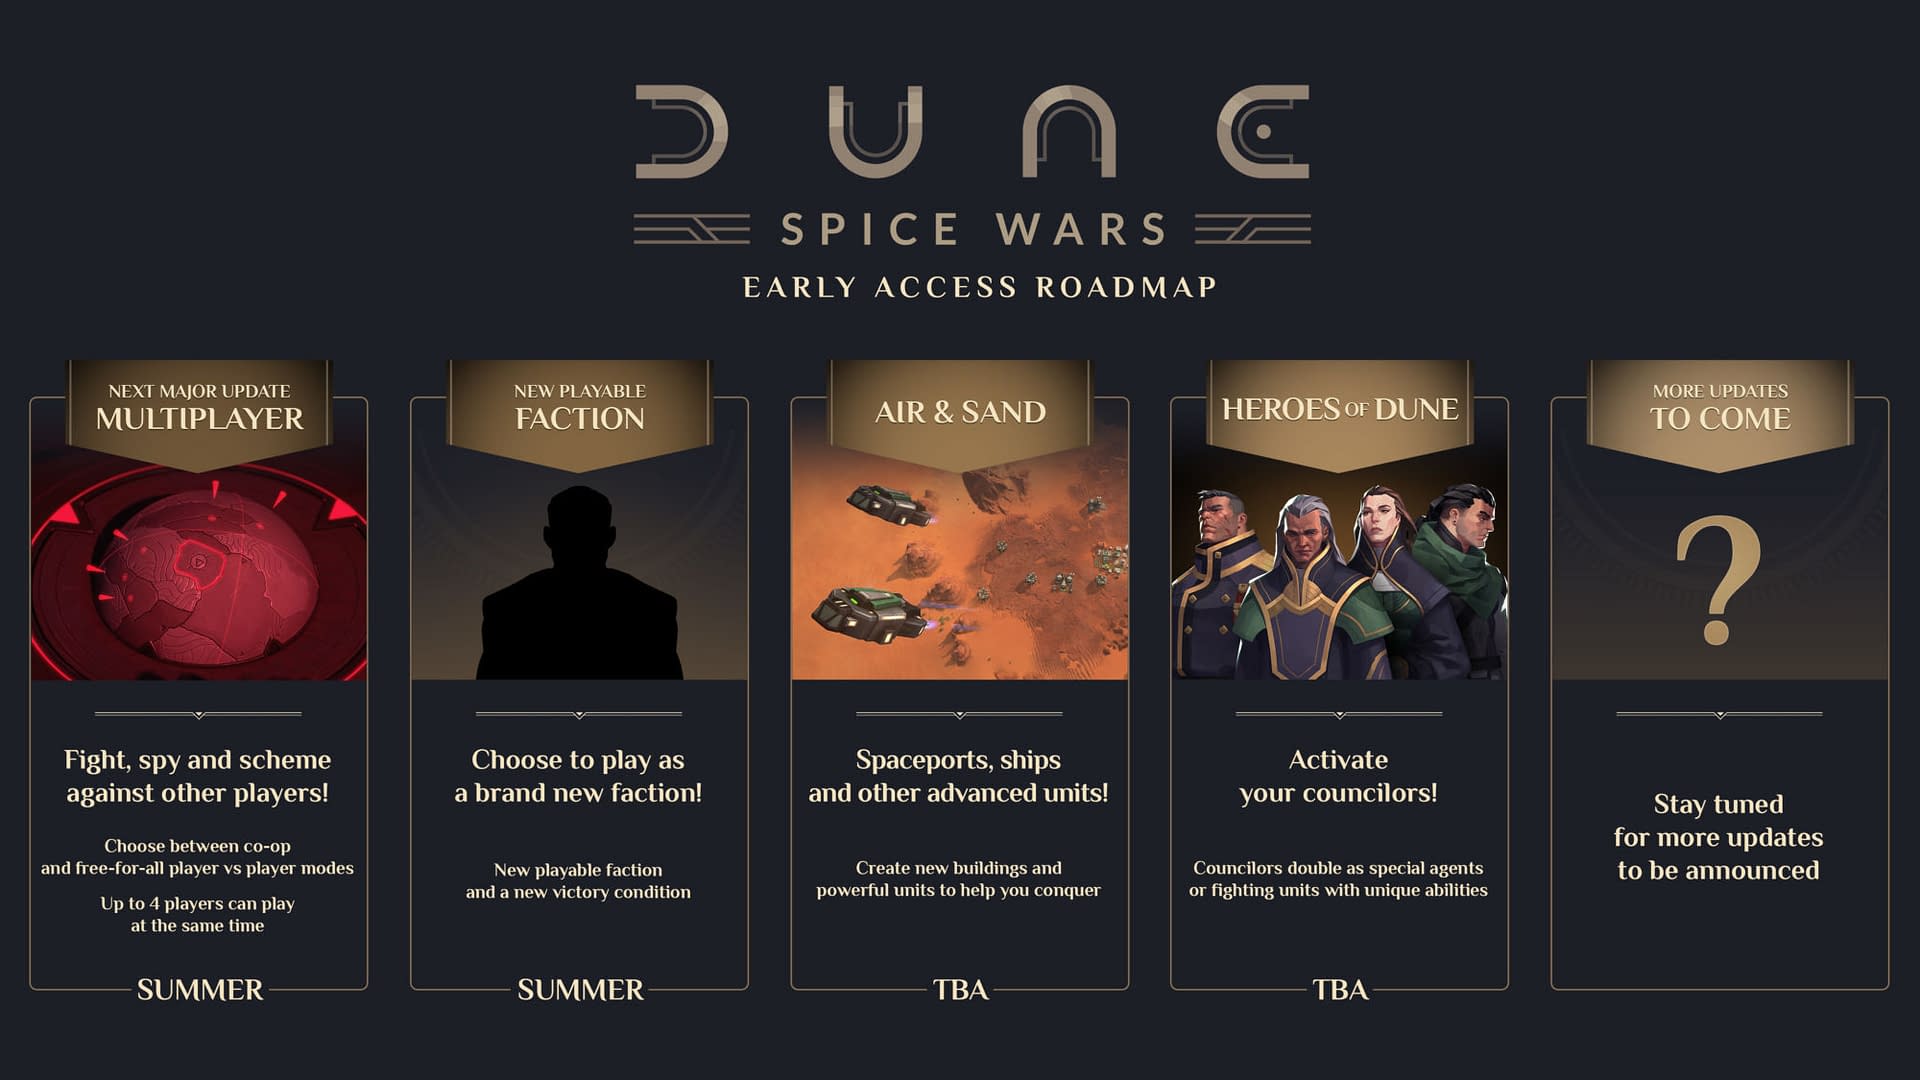 Dune Spice Wars Gives Better Idea Of Early Access Roadmap